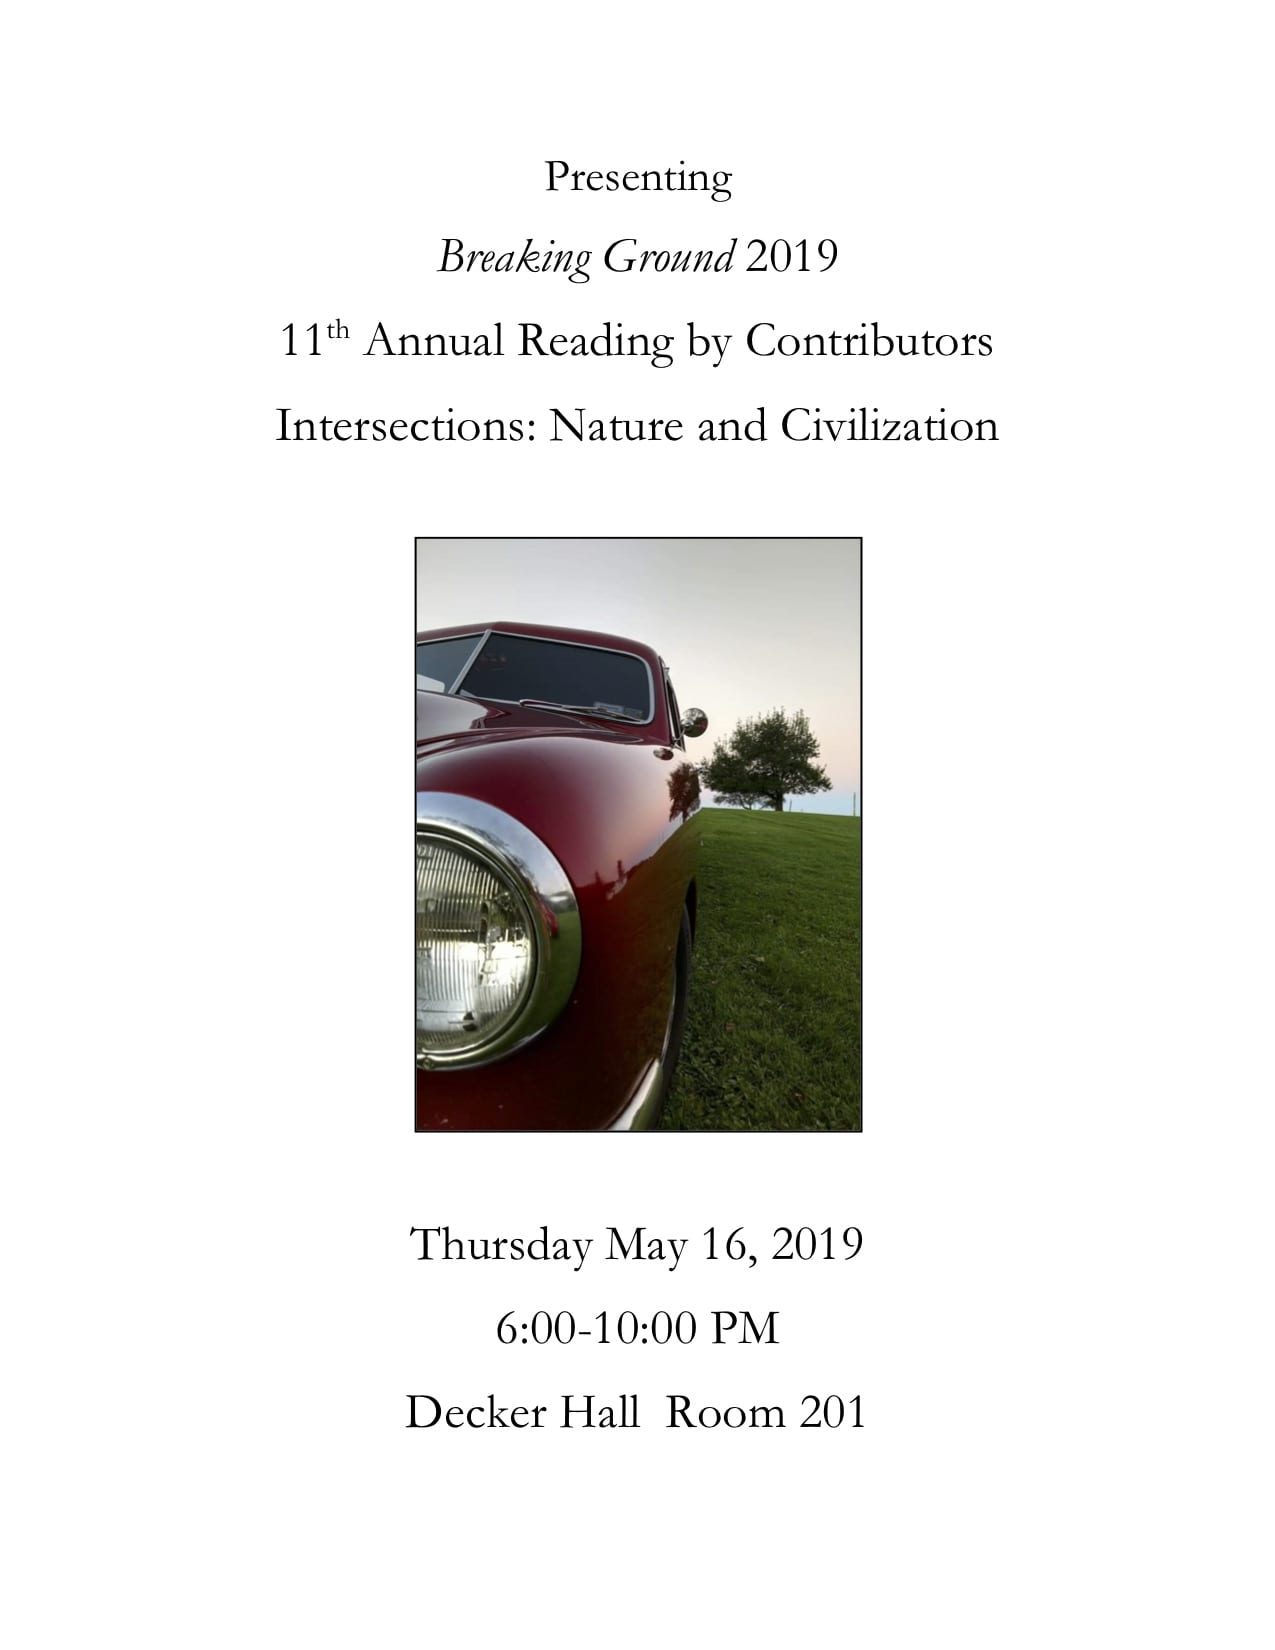 Join Breaking Ground, SUNY Broome's literary magazine, for its 11th annual reading by contributors from 6 to 10 p.m. Thursday, May 16, in Decker Hall Room 201.